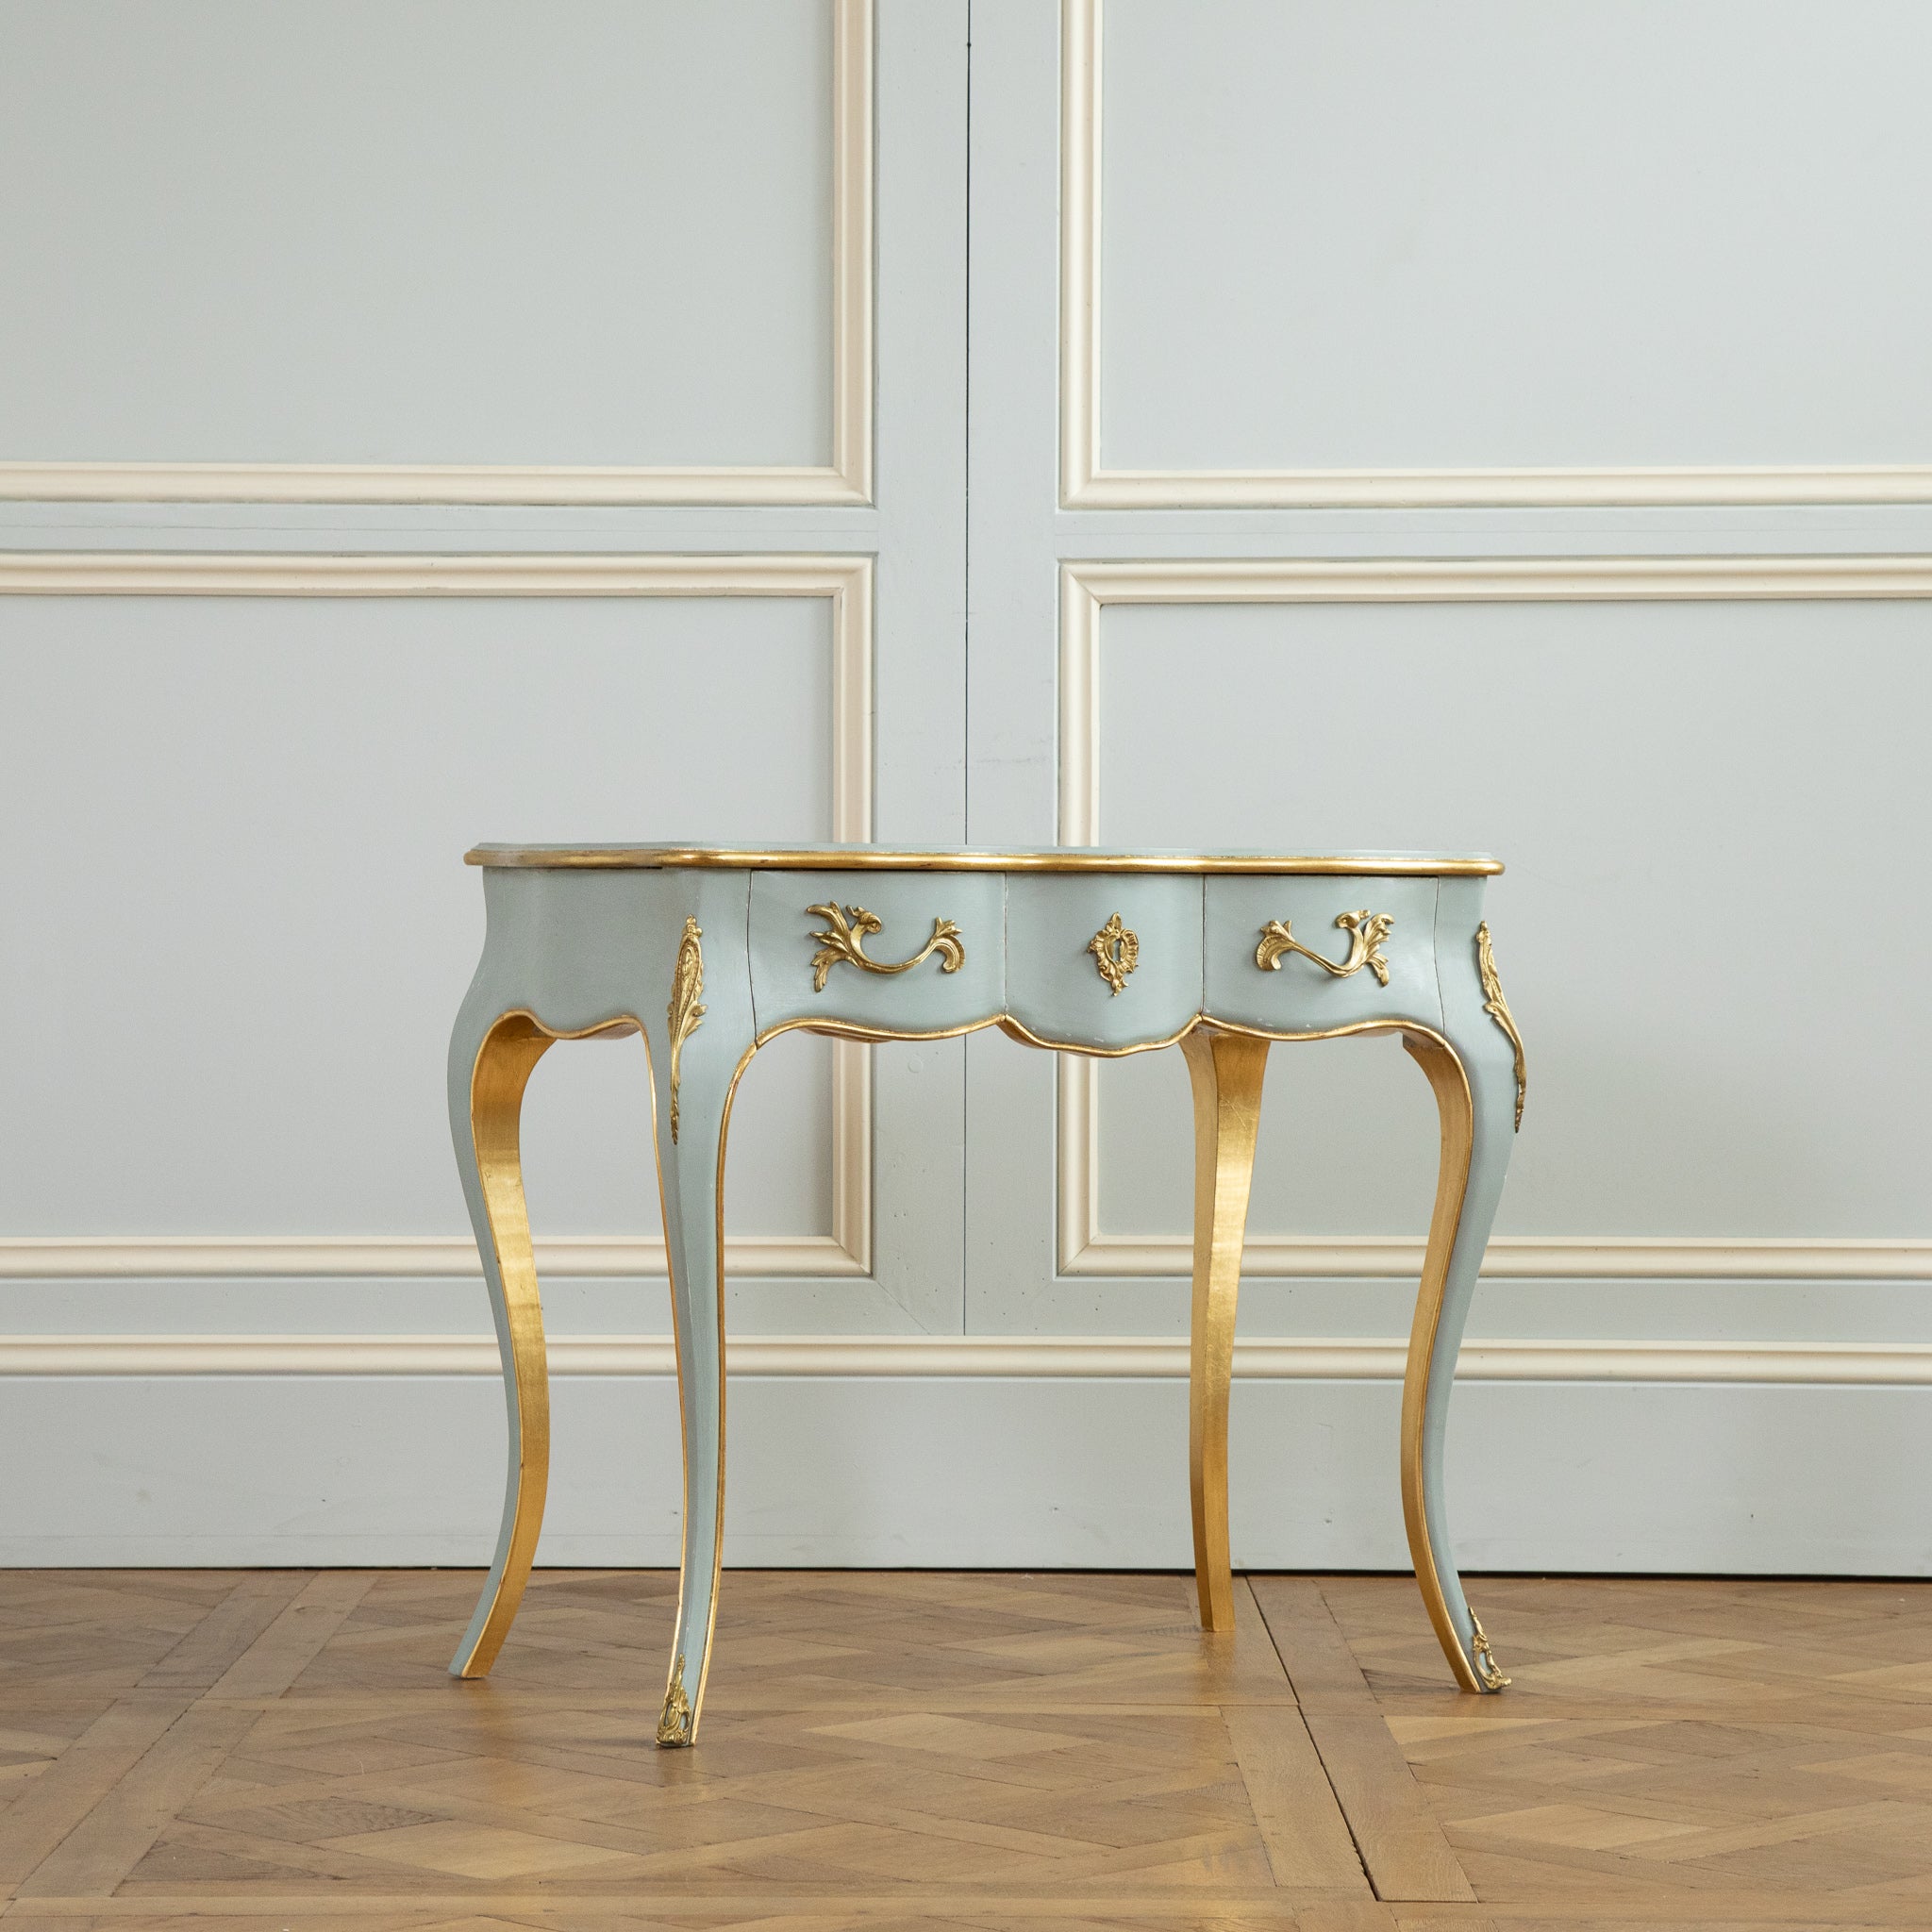 Louis XV style writing desk made by La Maison London.
Painted in a French grey with gold highlights.
mounted on Serpentine legs with decorative bronzes ornaments .
there is two drawers.
A matching stool is also available if required 
the desk